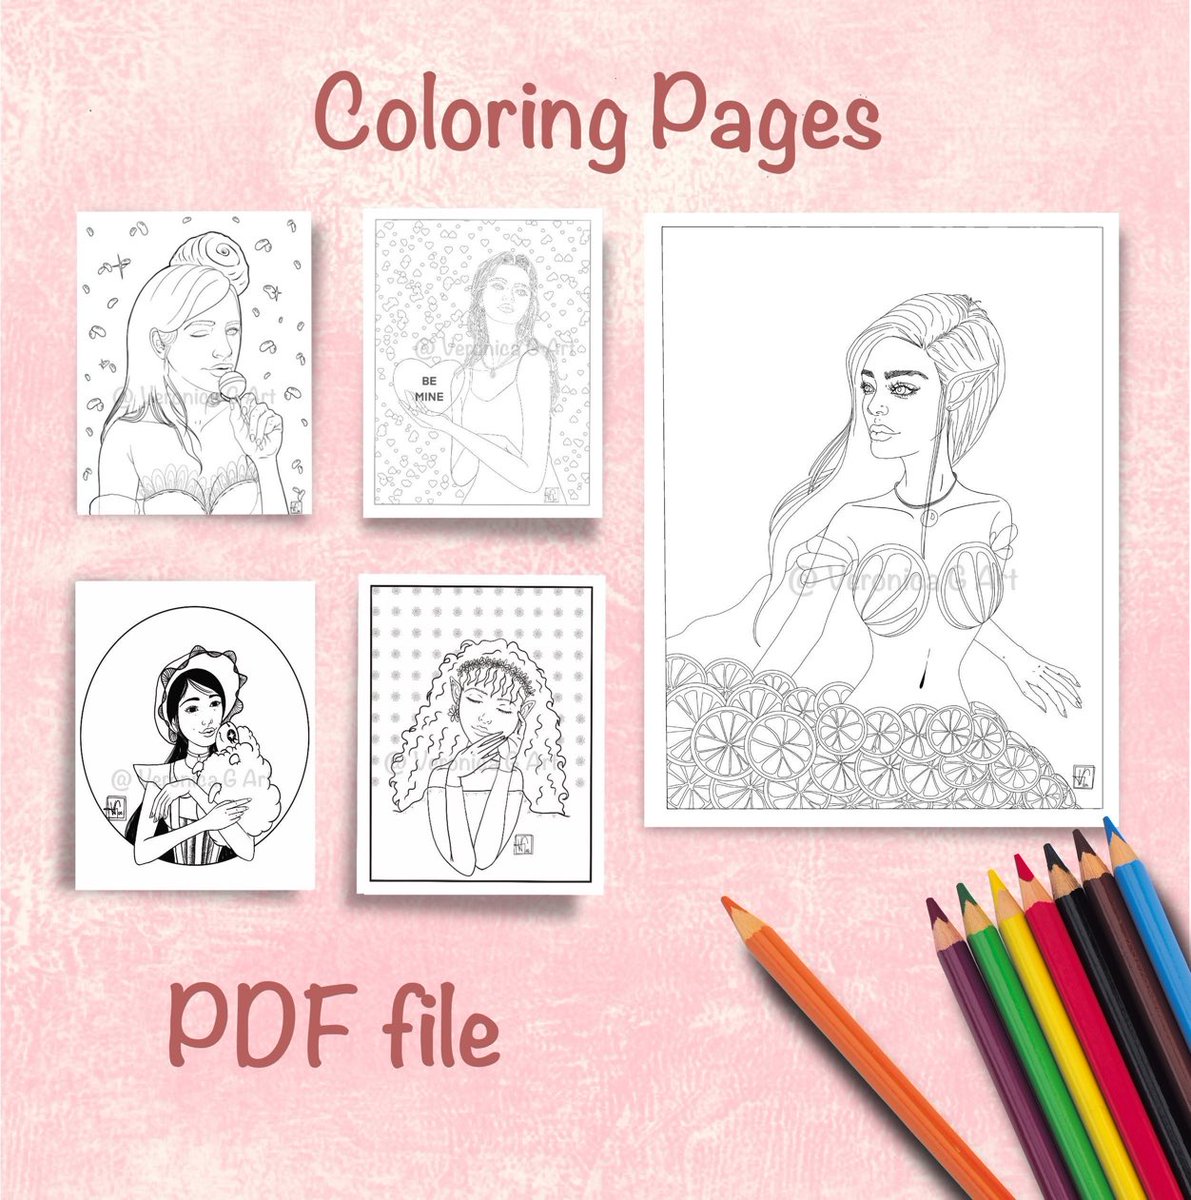 Excited to share the latest addition to my #etsy shop: Sweet Girls coloring pages #sweetgirls #fantasyscifi #coloringpages #pdffile #beautifulwoman #fairies #fantasypages #advancedcoloring #adultcolouring etsy.me/3X42Ows